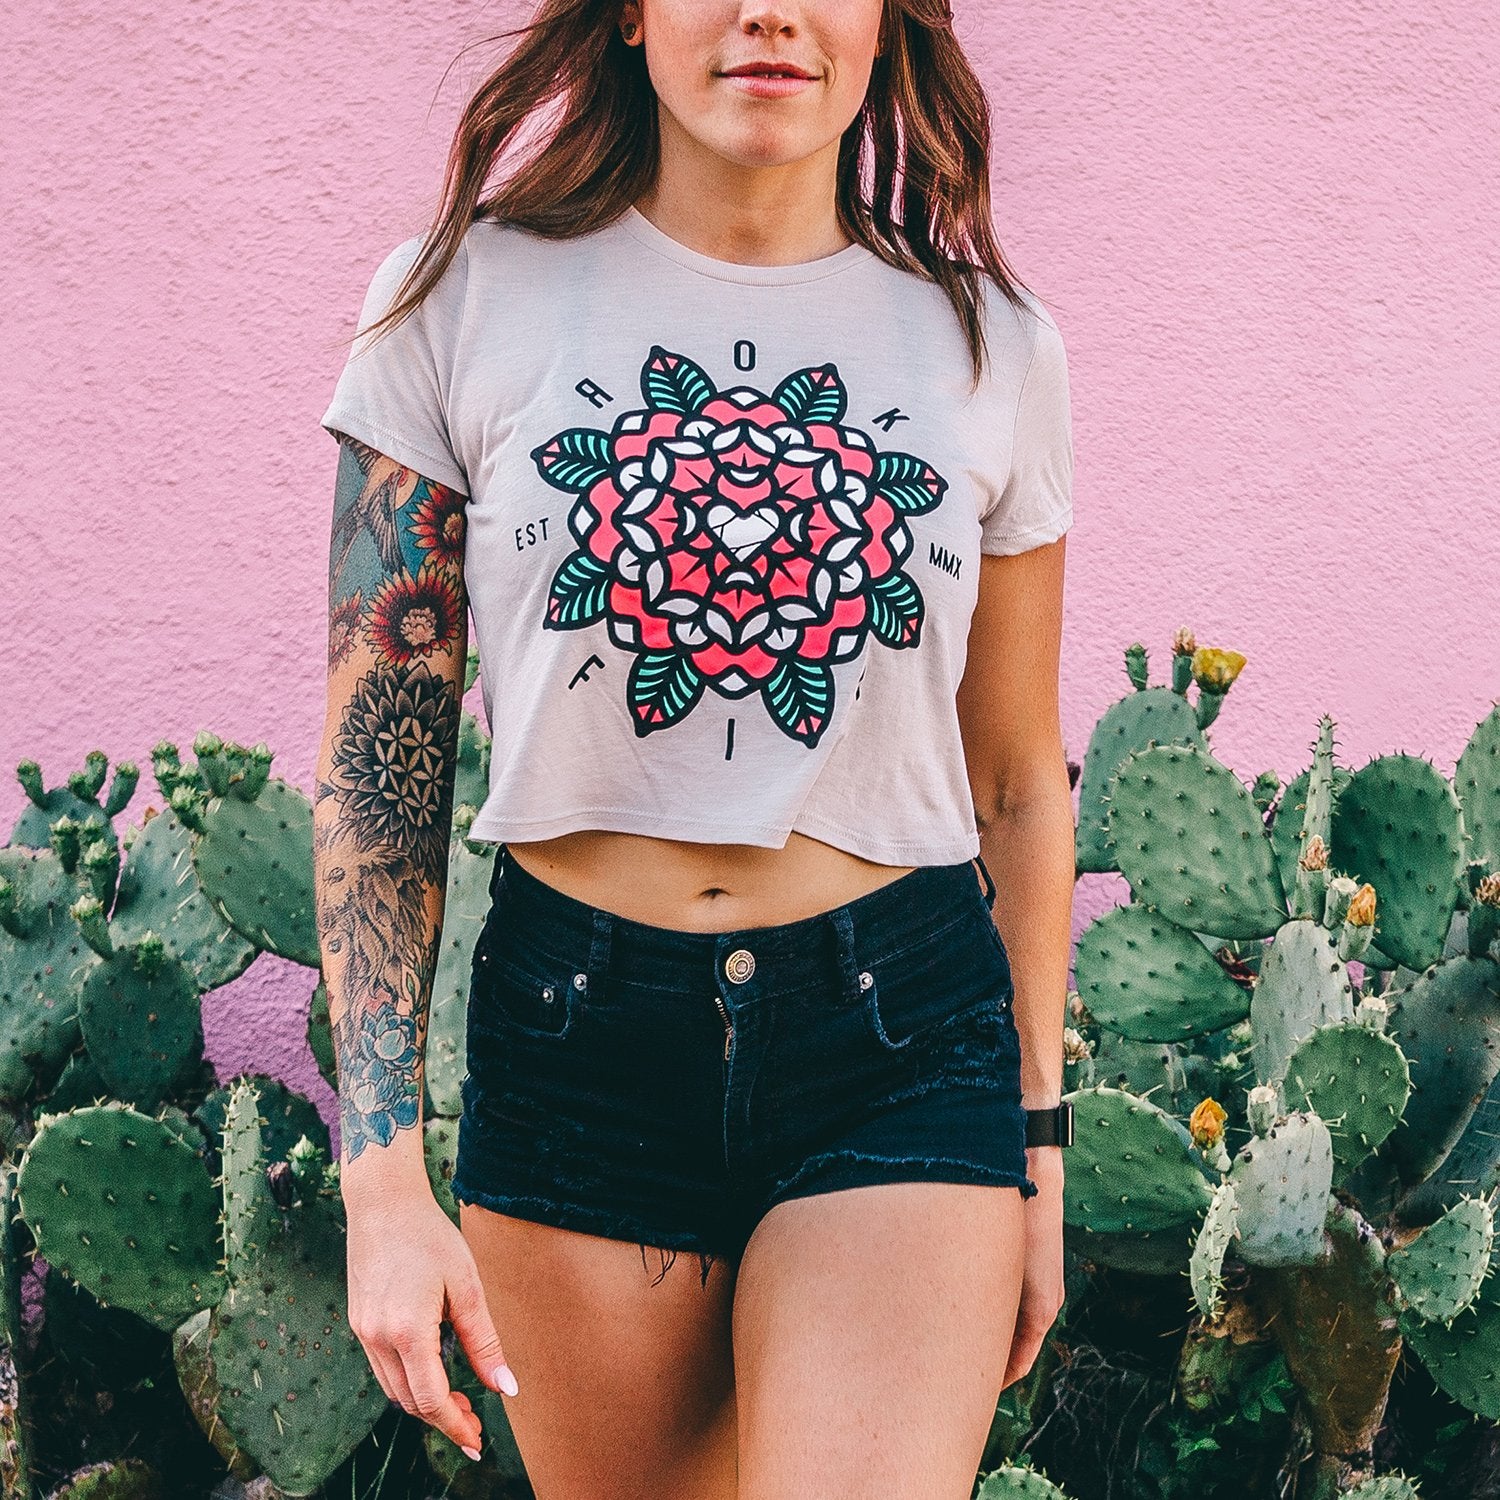 The Mandala Crop Top from Rokfit for Genejack WOD